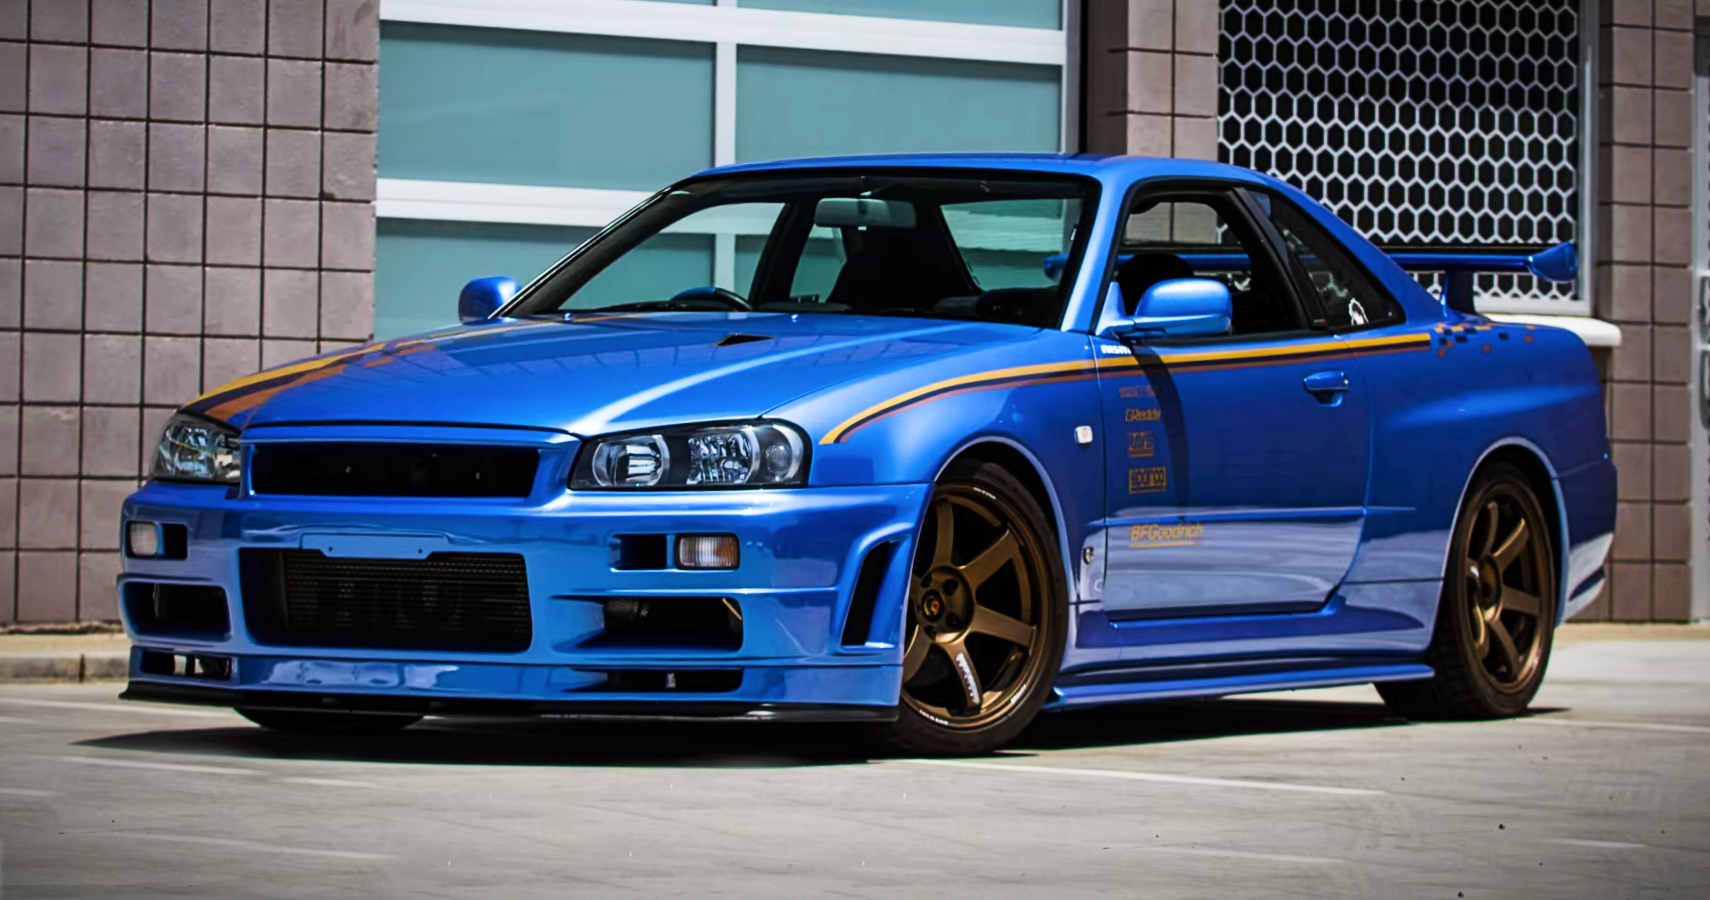 Reasons To Avoid Importing The R34 Nissan Skyline GT-R